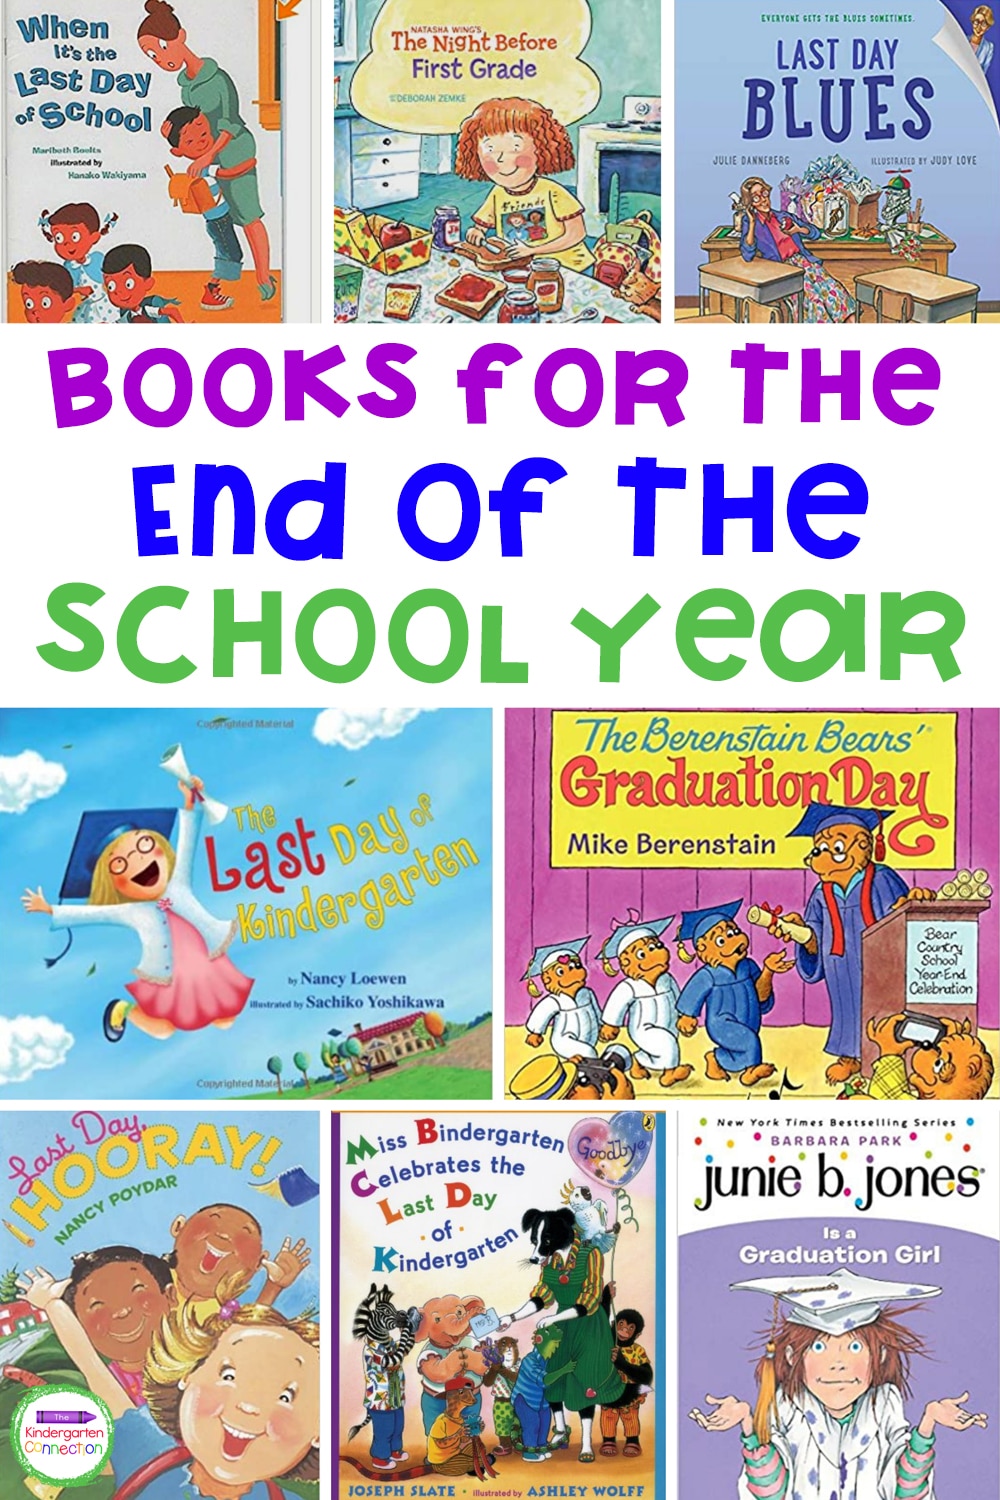 Books for the End of the School Year in Kindergarten